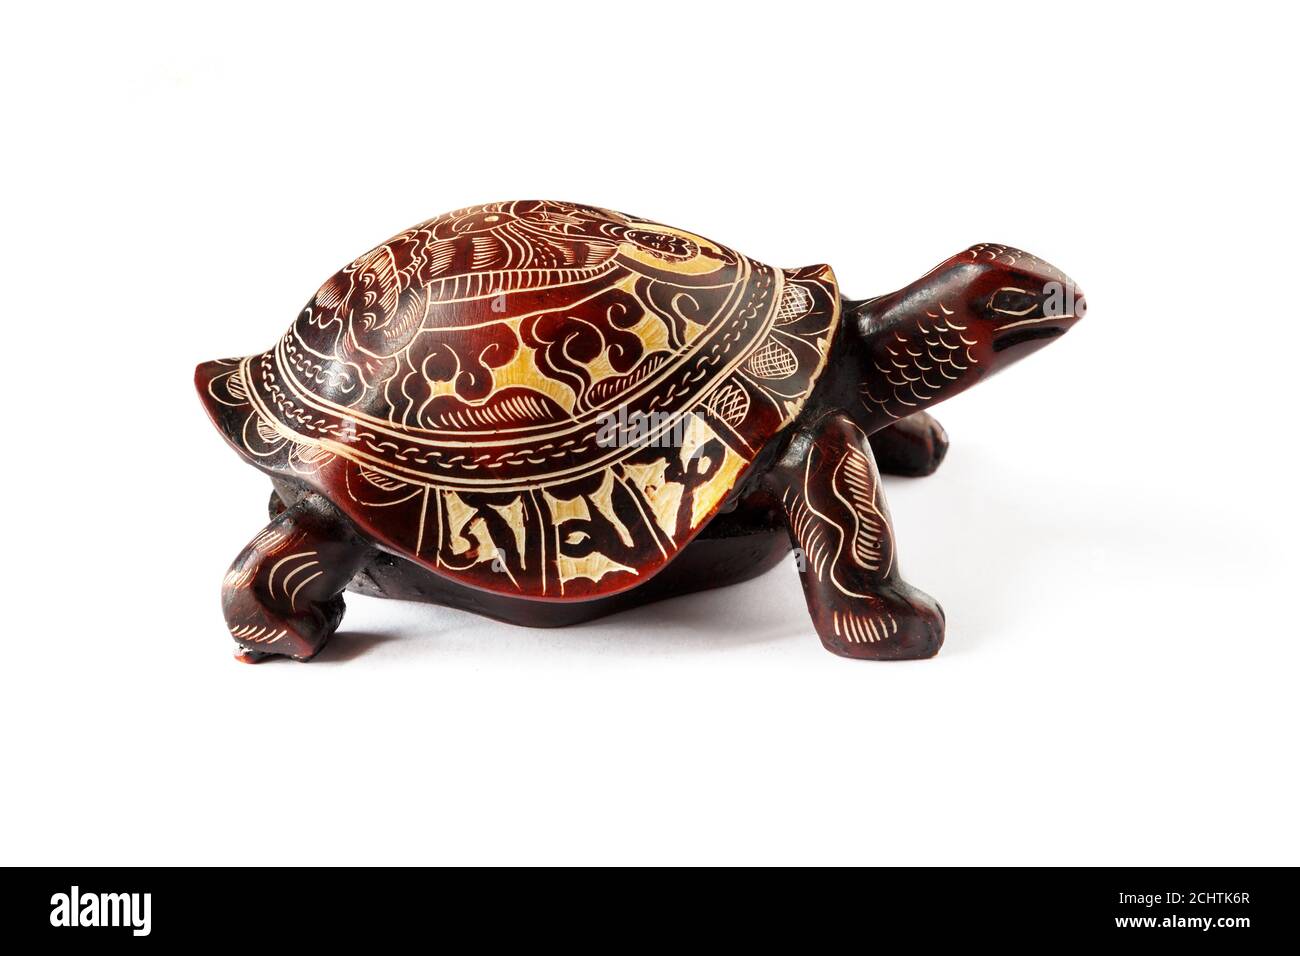 Turtle with the image of the Buddha on the shell, white background. Stock Photo